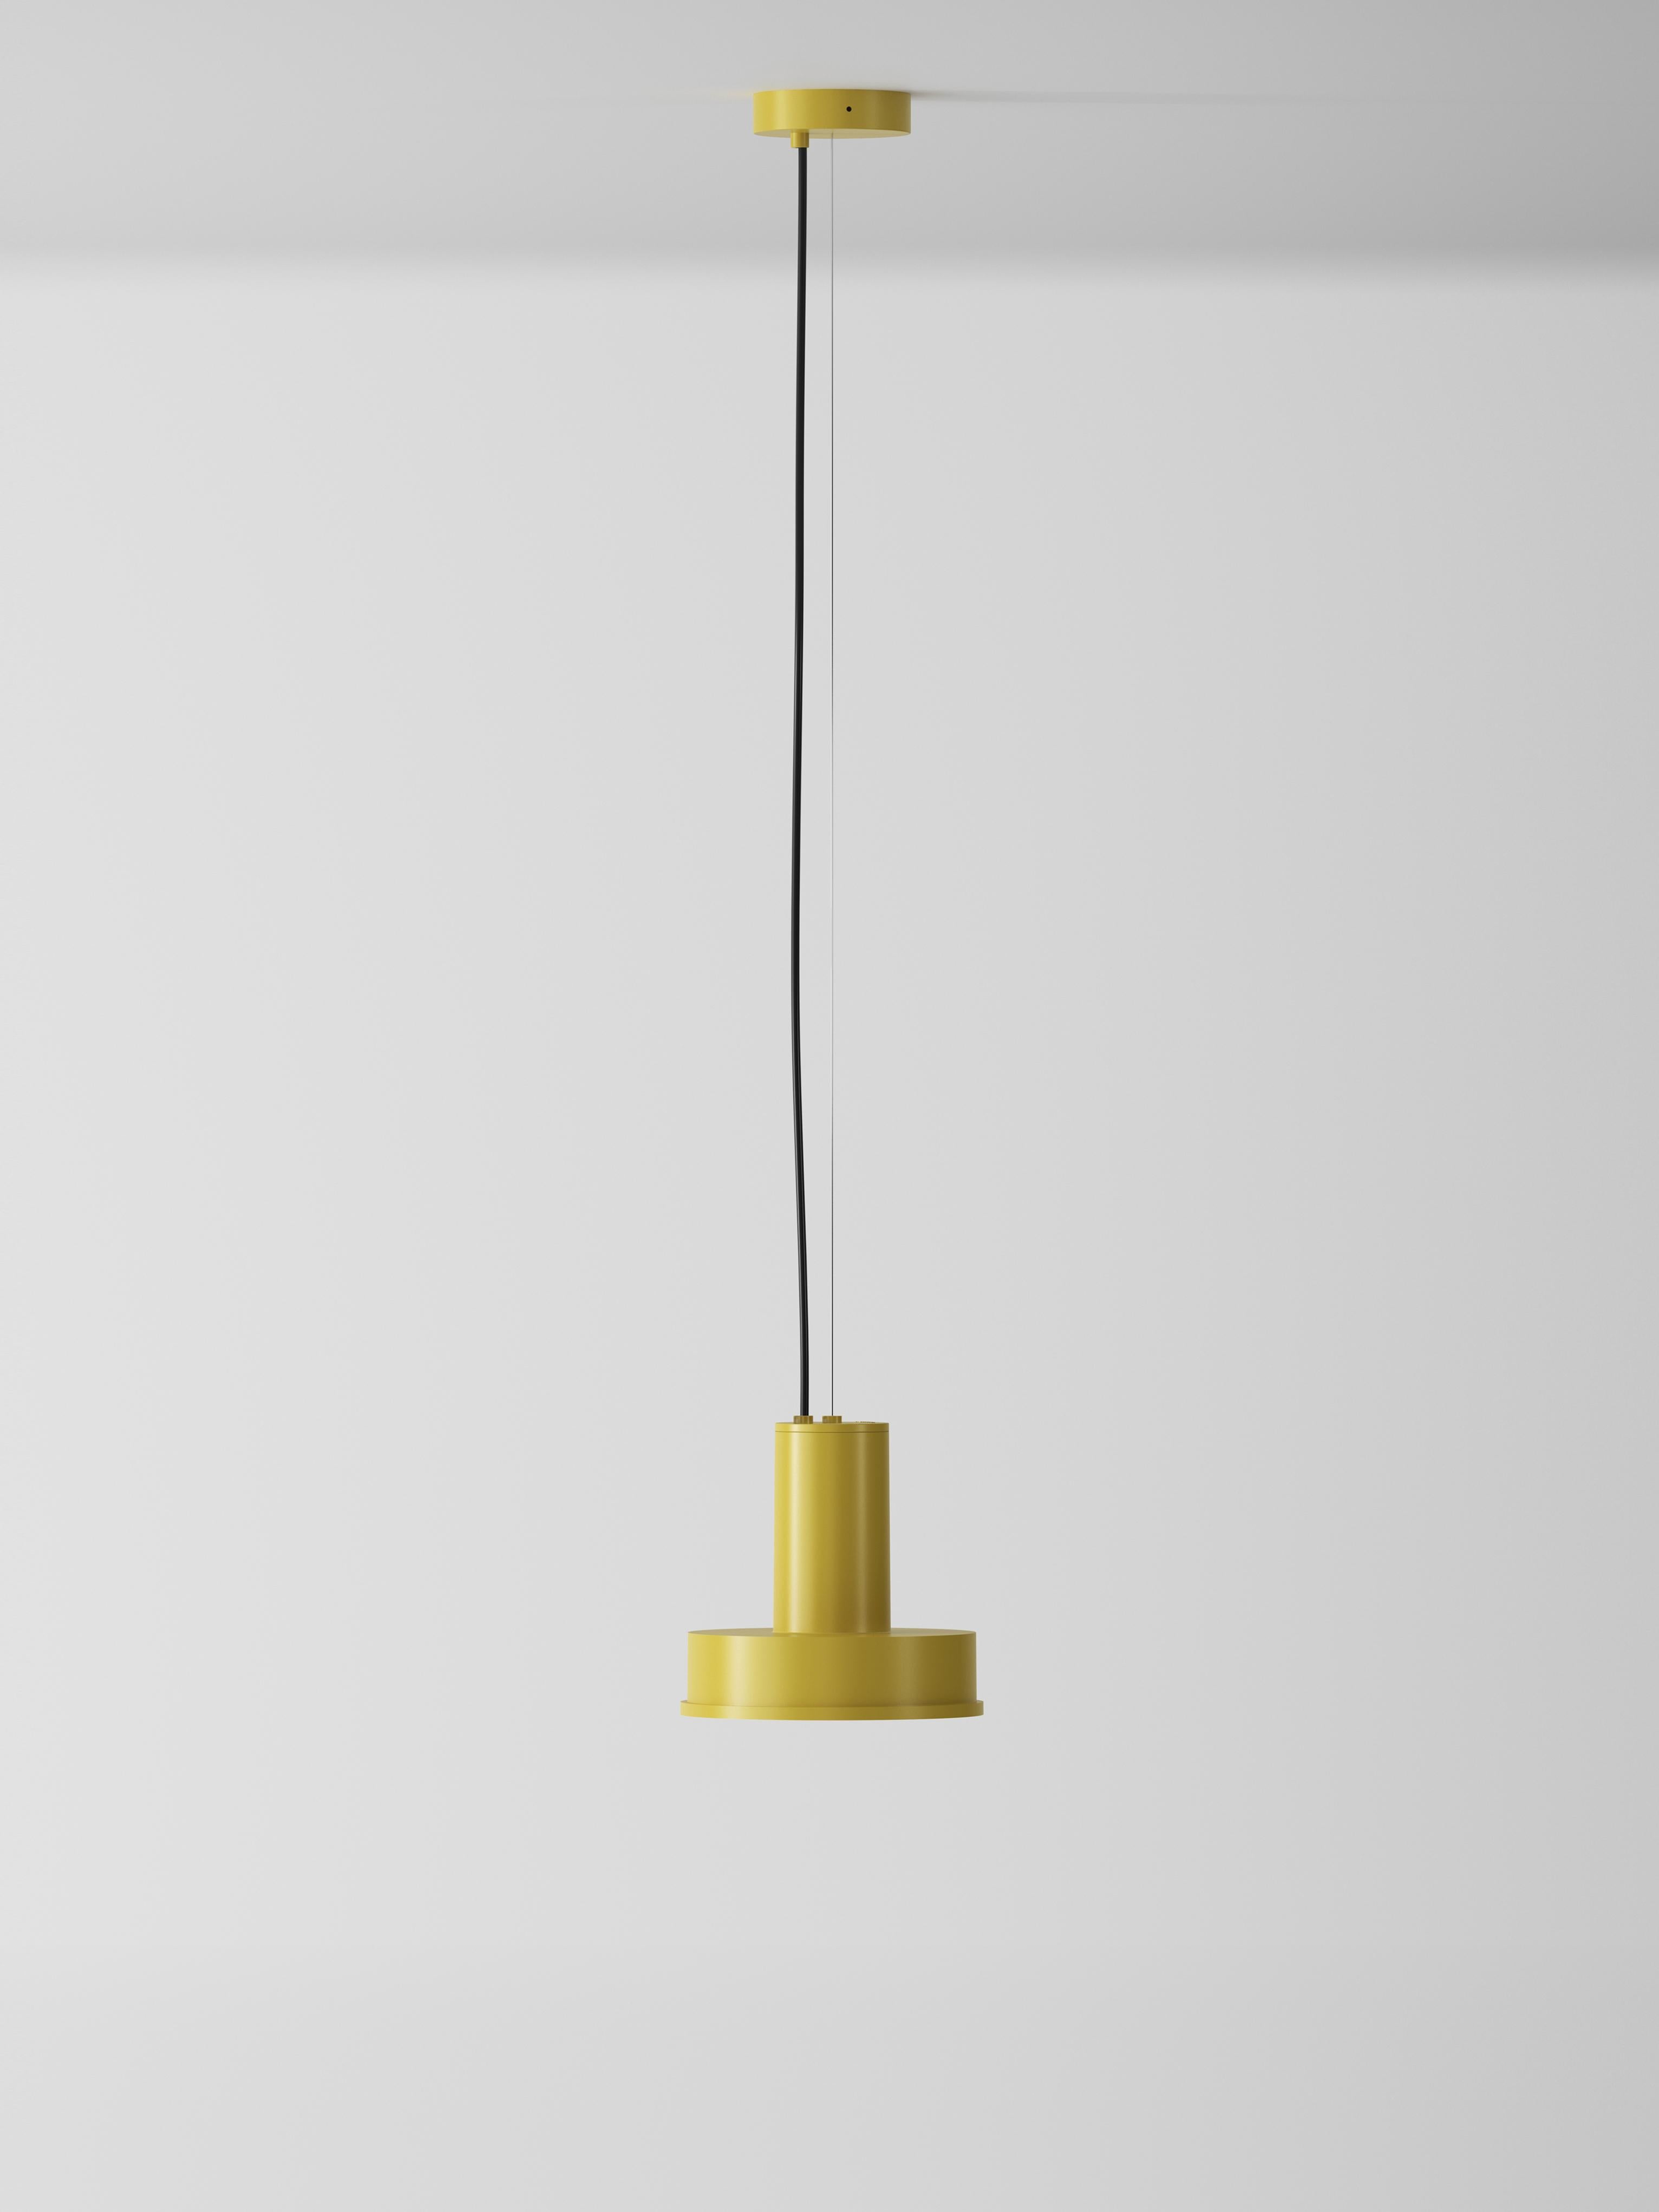 Mustard Arne S Domus pendant lamp by Santa & Cole
Dimensions: D 23 x H 440 cm
Materials: Metal, aluminum.
Available in other colors.

Its aluminium body houses the very best LED technology with a single COB emitter, shielded from view by a